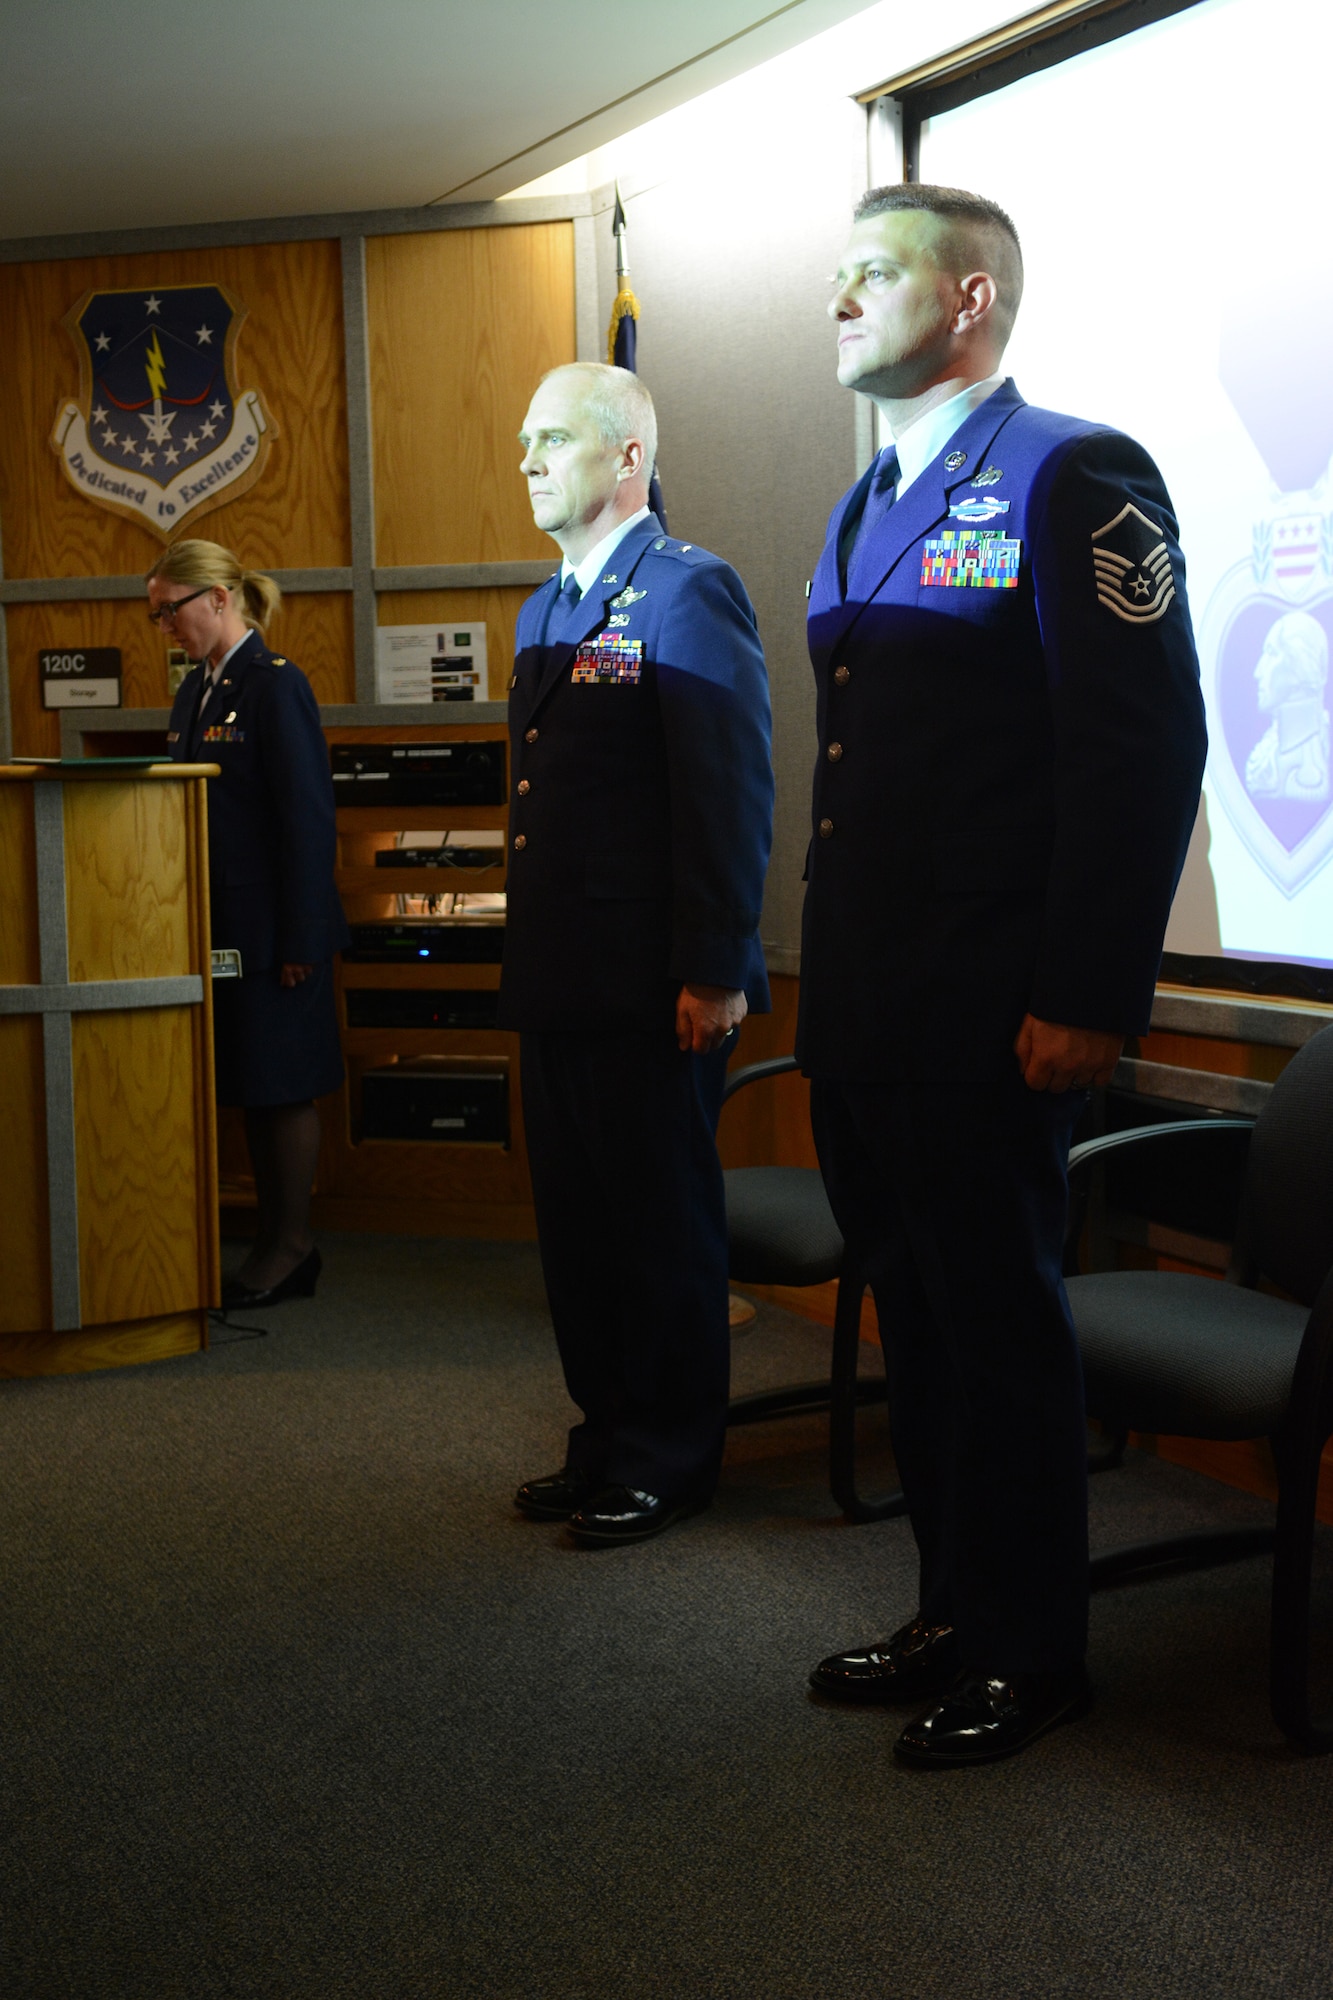 Brig. Gen. Gary L. Ebben, Wisconsin's assistant adjutant general for Air, and Master Sgt. Joshua Johnson, 115th Fighter Wing budget analyst, stand tall during a Purple Heart medal ceremony at the 115 FW in Madison, Wis., May 3, 2014. Johnson was awarded the medal after being thrown from his gunner’s seat and injured during a 2005 deployment. (Air National Guard photo by Senior Airman Andrea F. Liechti)